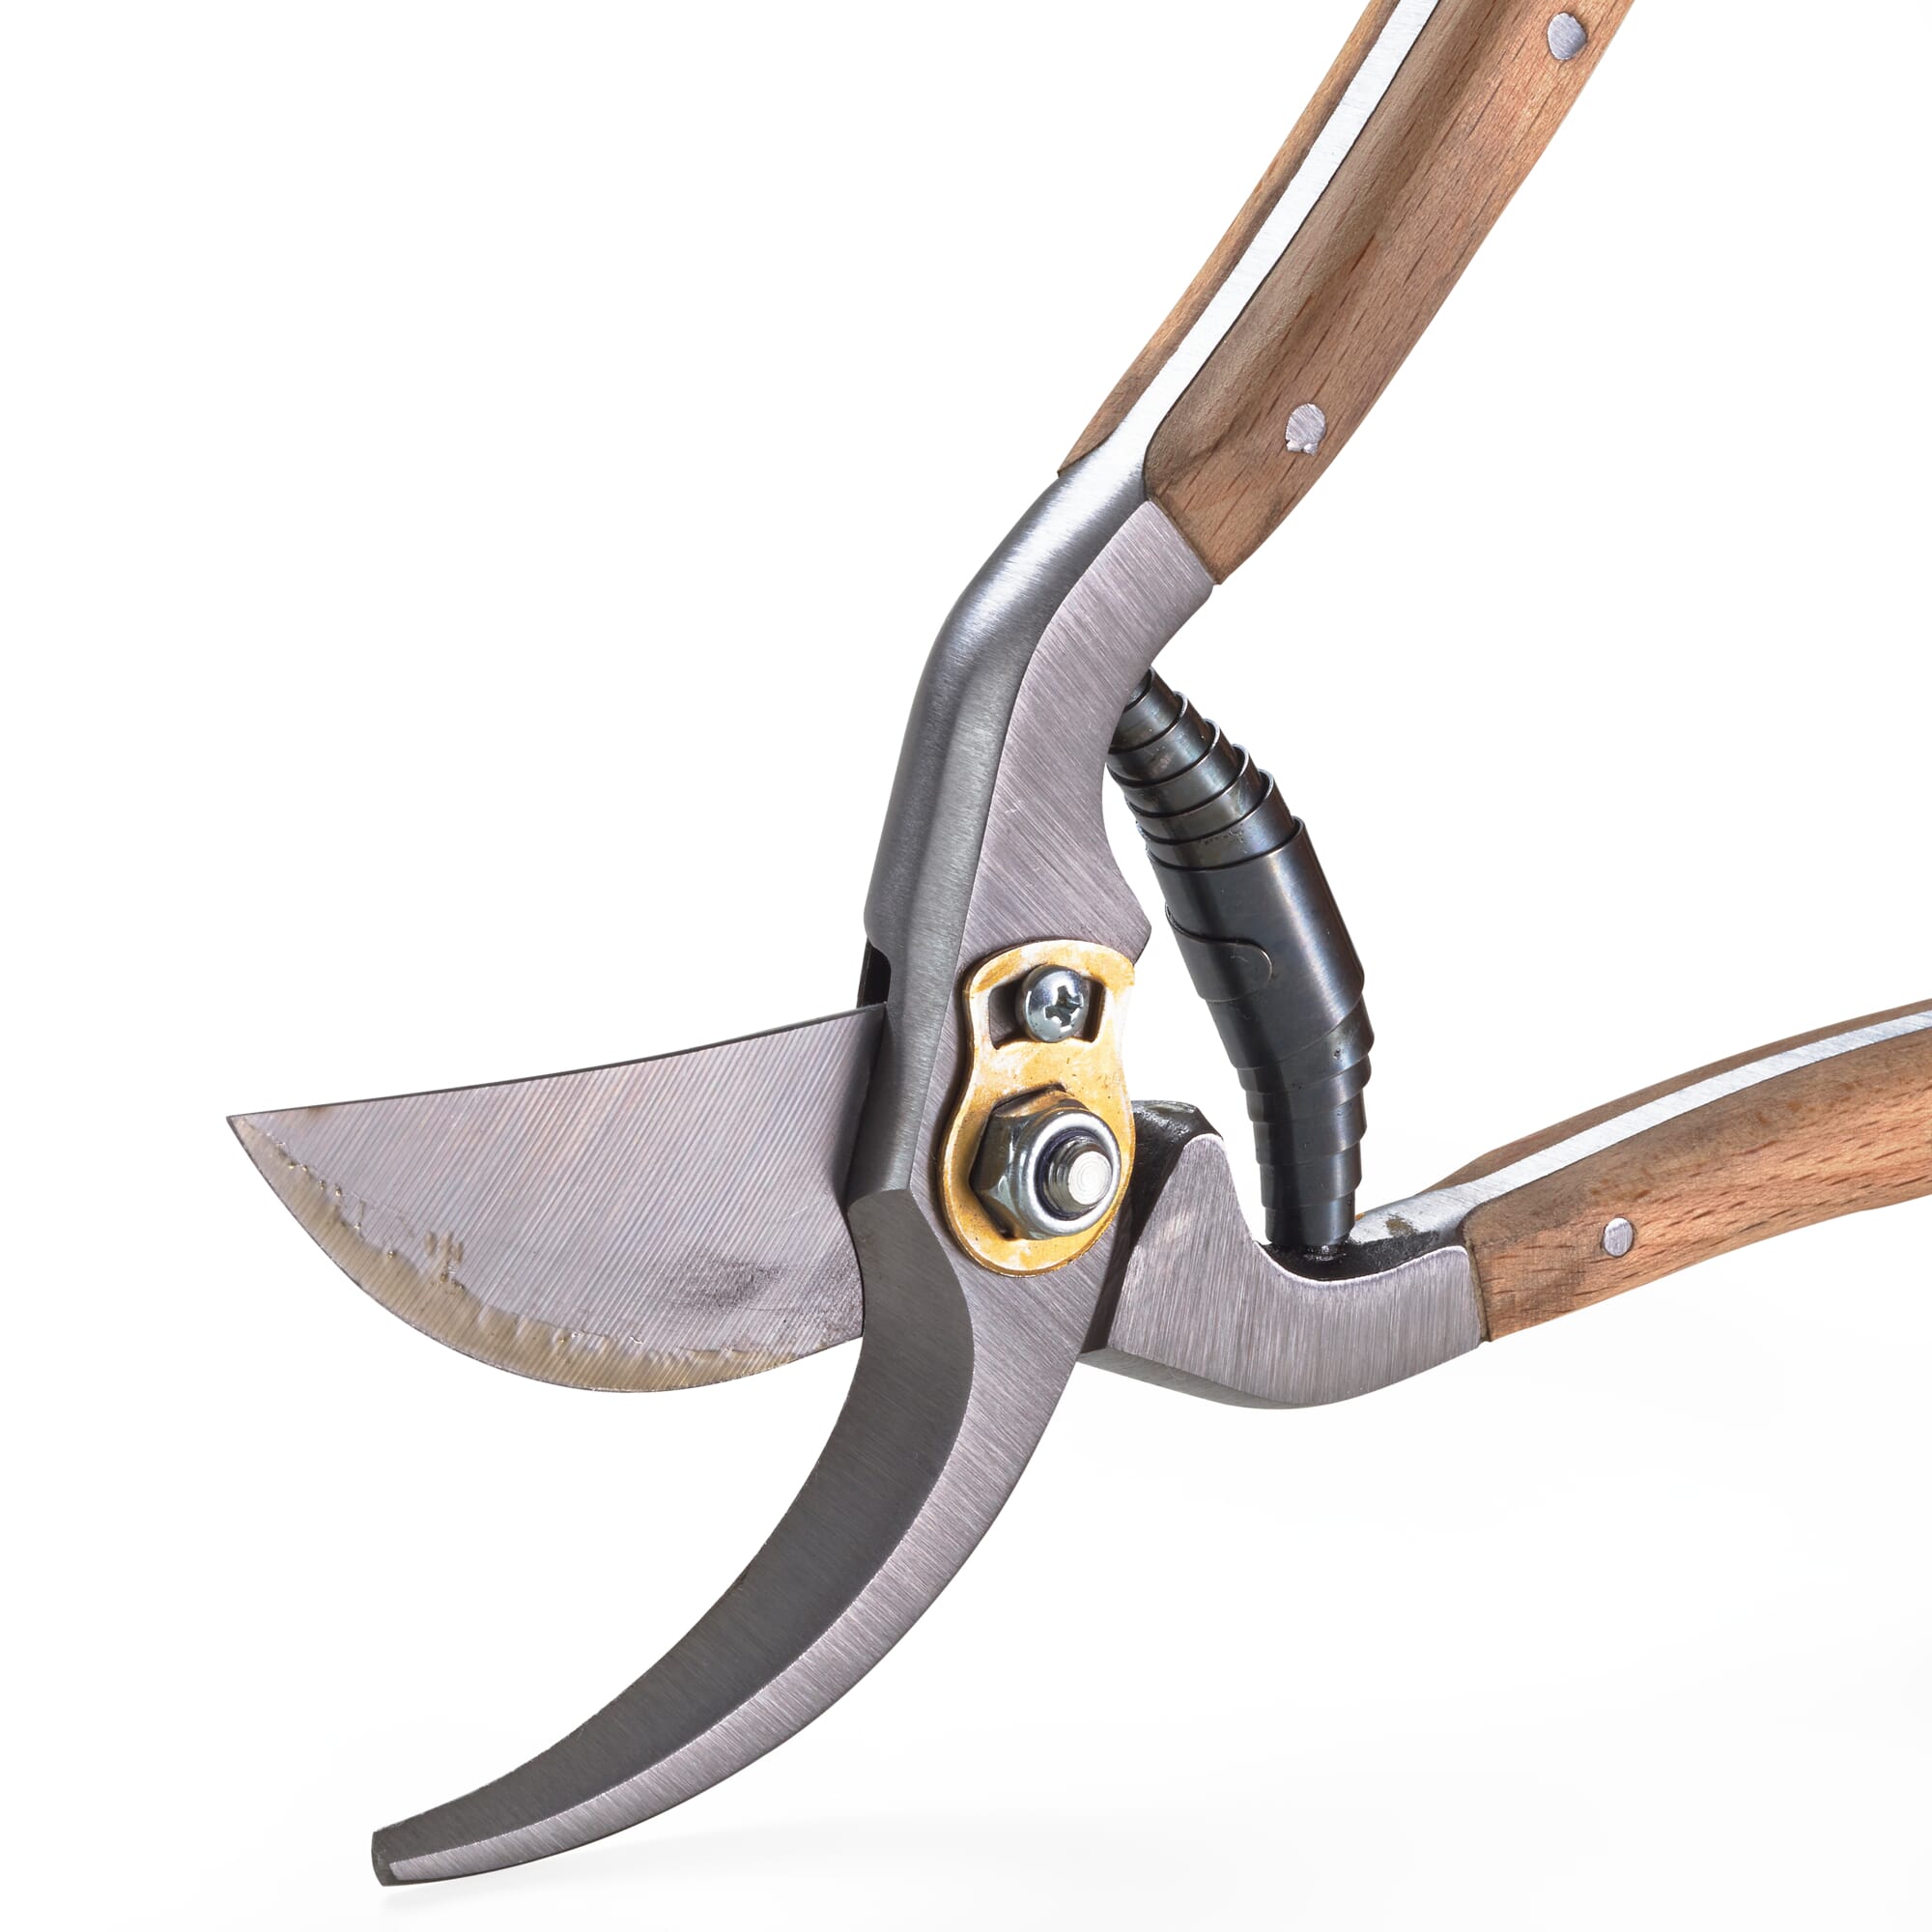 Image of Garden shears with wooden handles